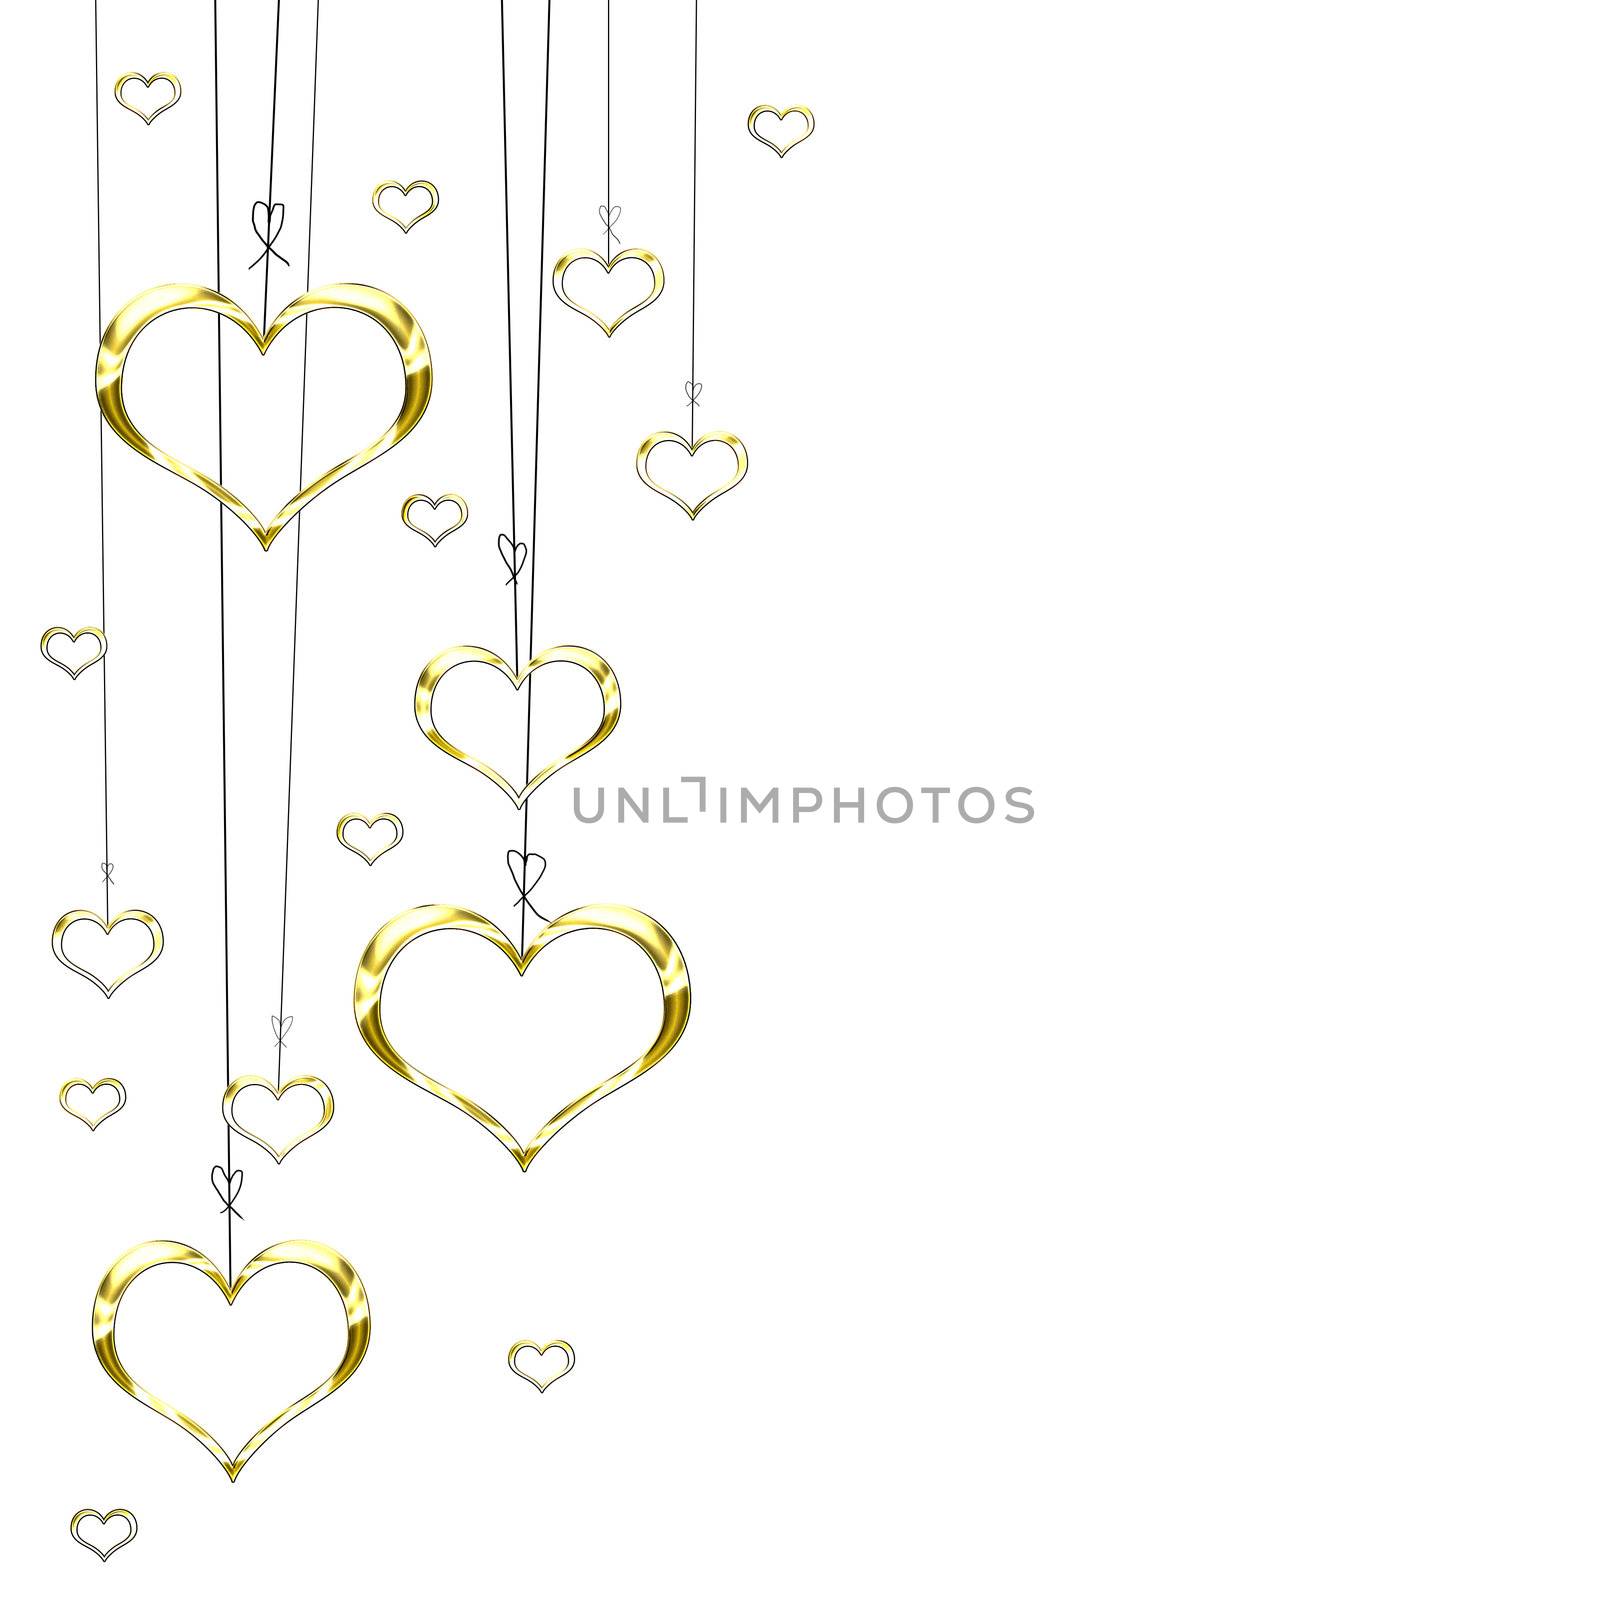 Valenties Day Card with golden hearts on a white background